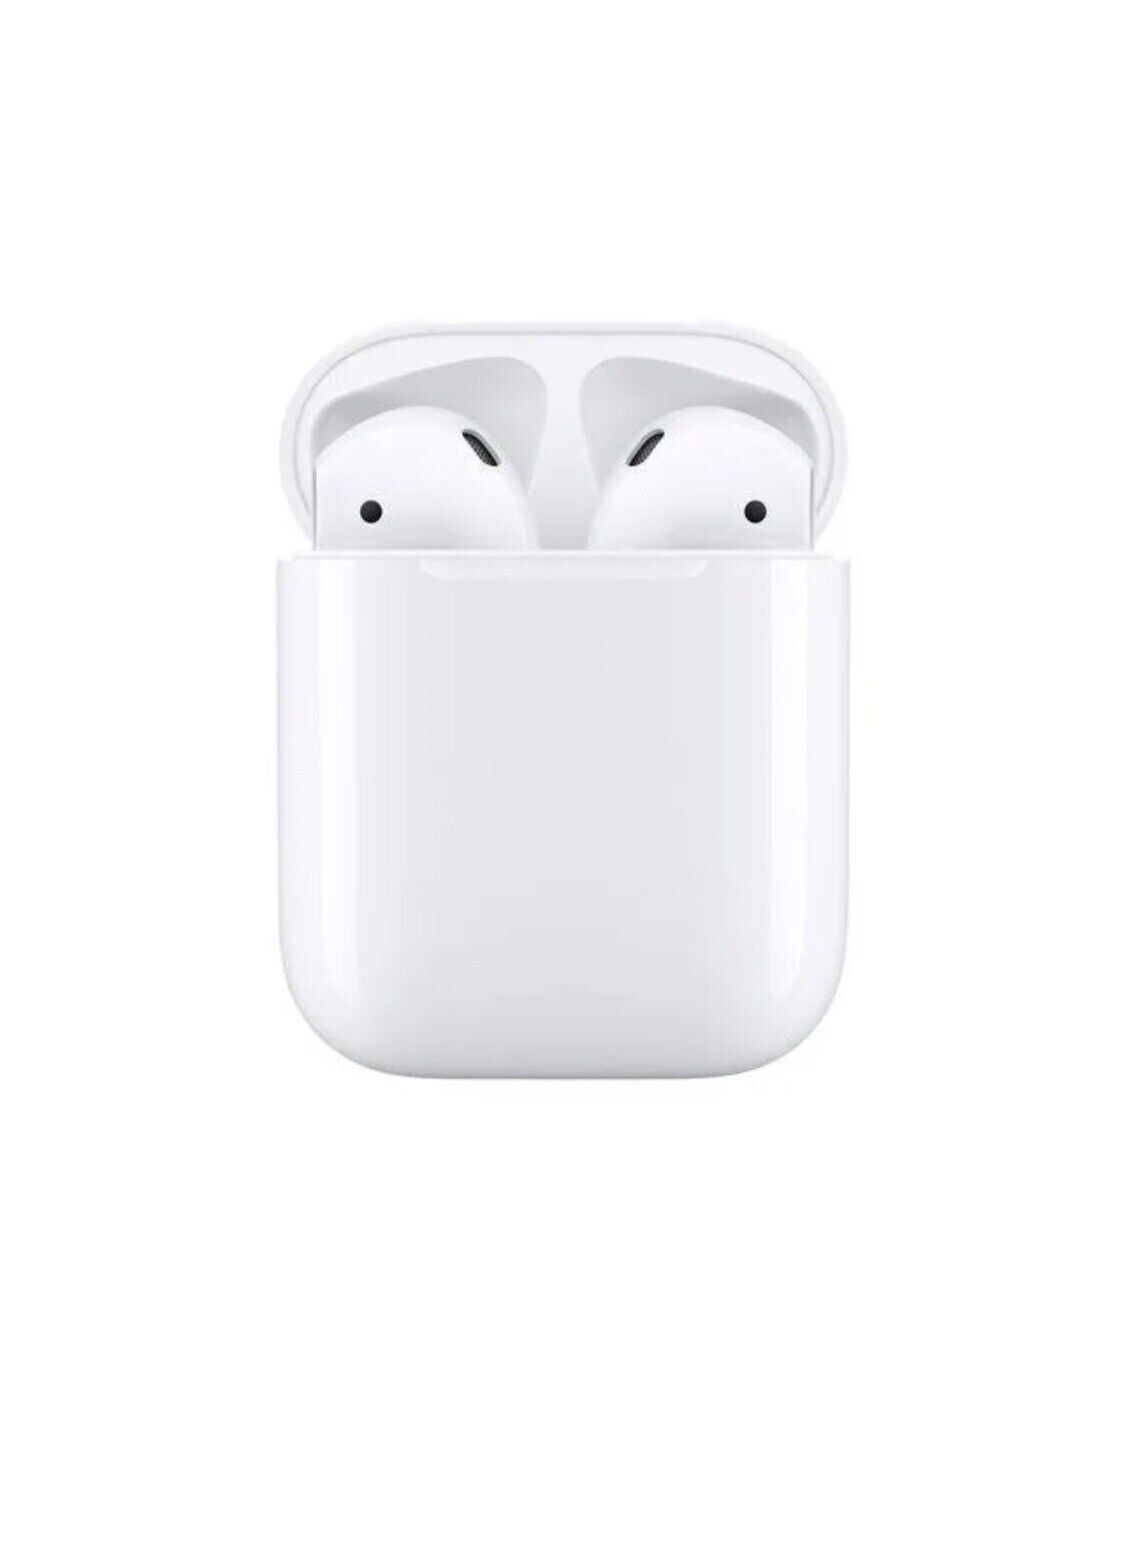 apple airpods (2nd generation) airpods. product type: headset. connectivity technology: true wireless stereo (tws) bluetooth. recommended usage: calls/music. weight: 46 g. product colour: white uomo